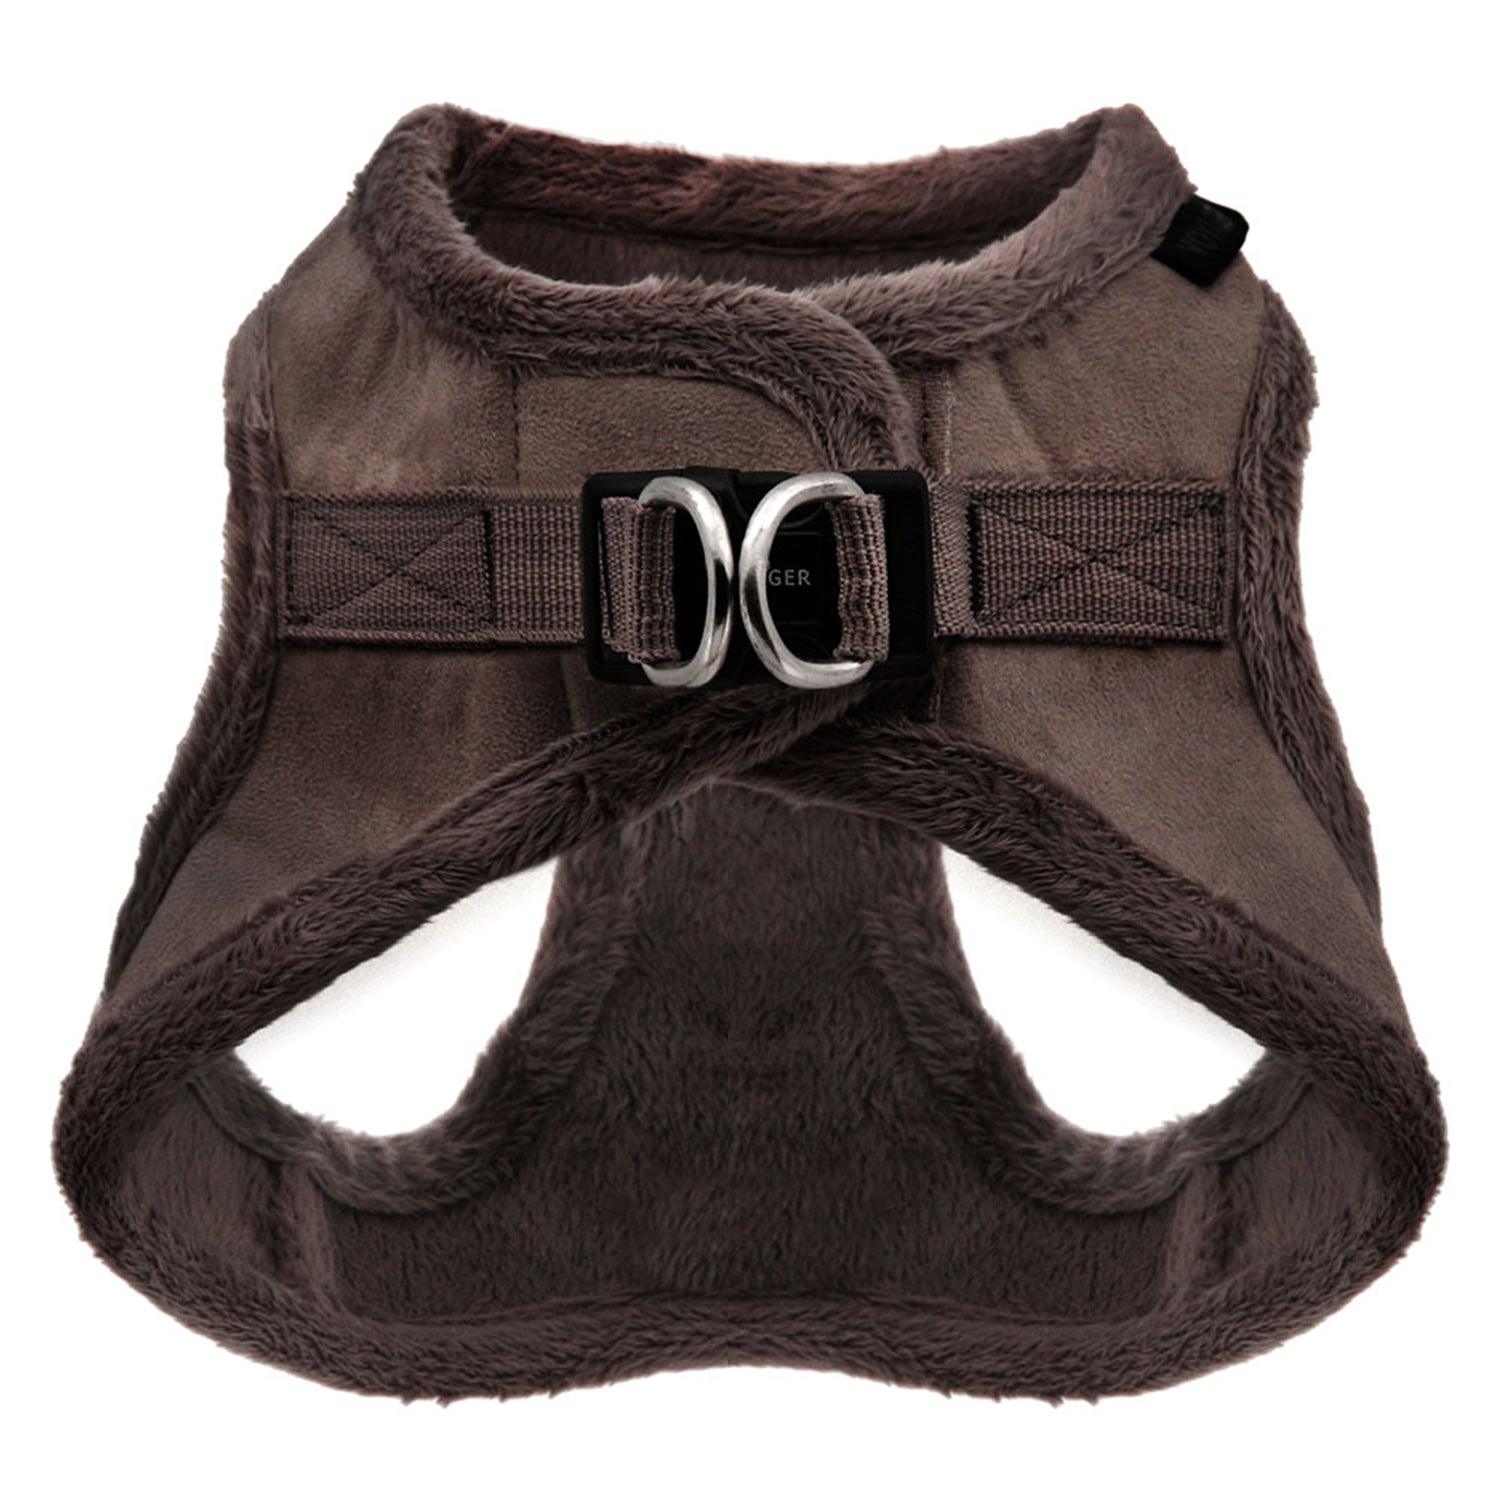 Step-In Plush Pet Harness - VOYAGER Dog Harnesses